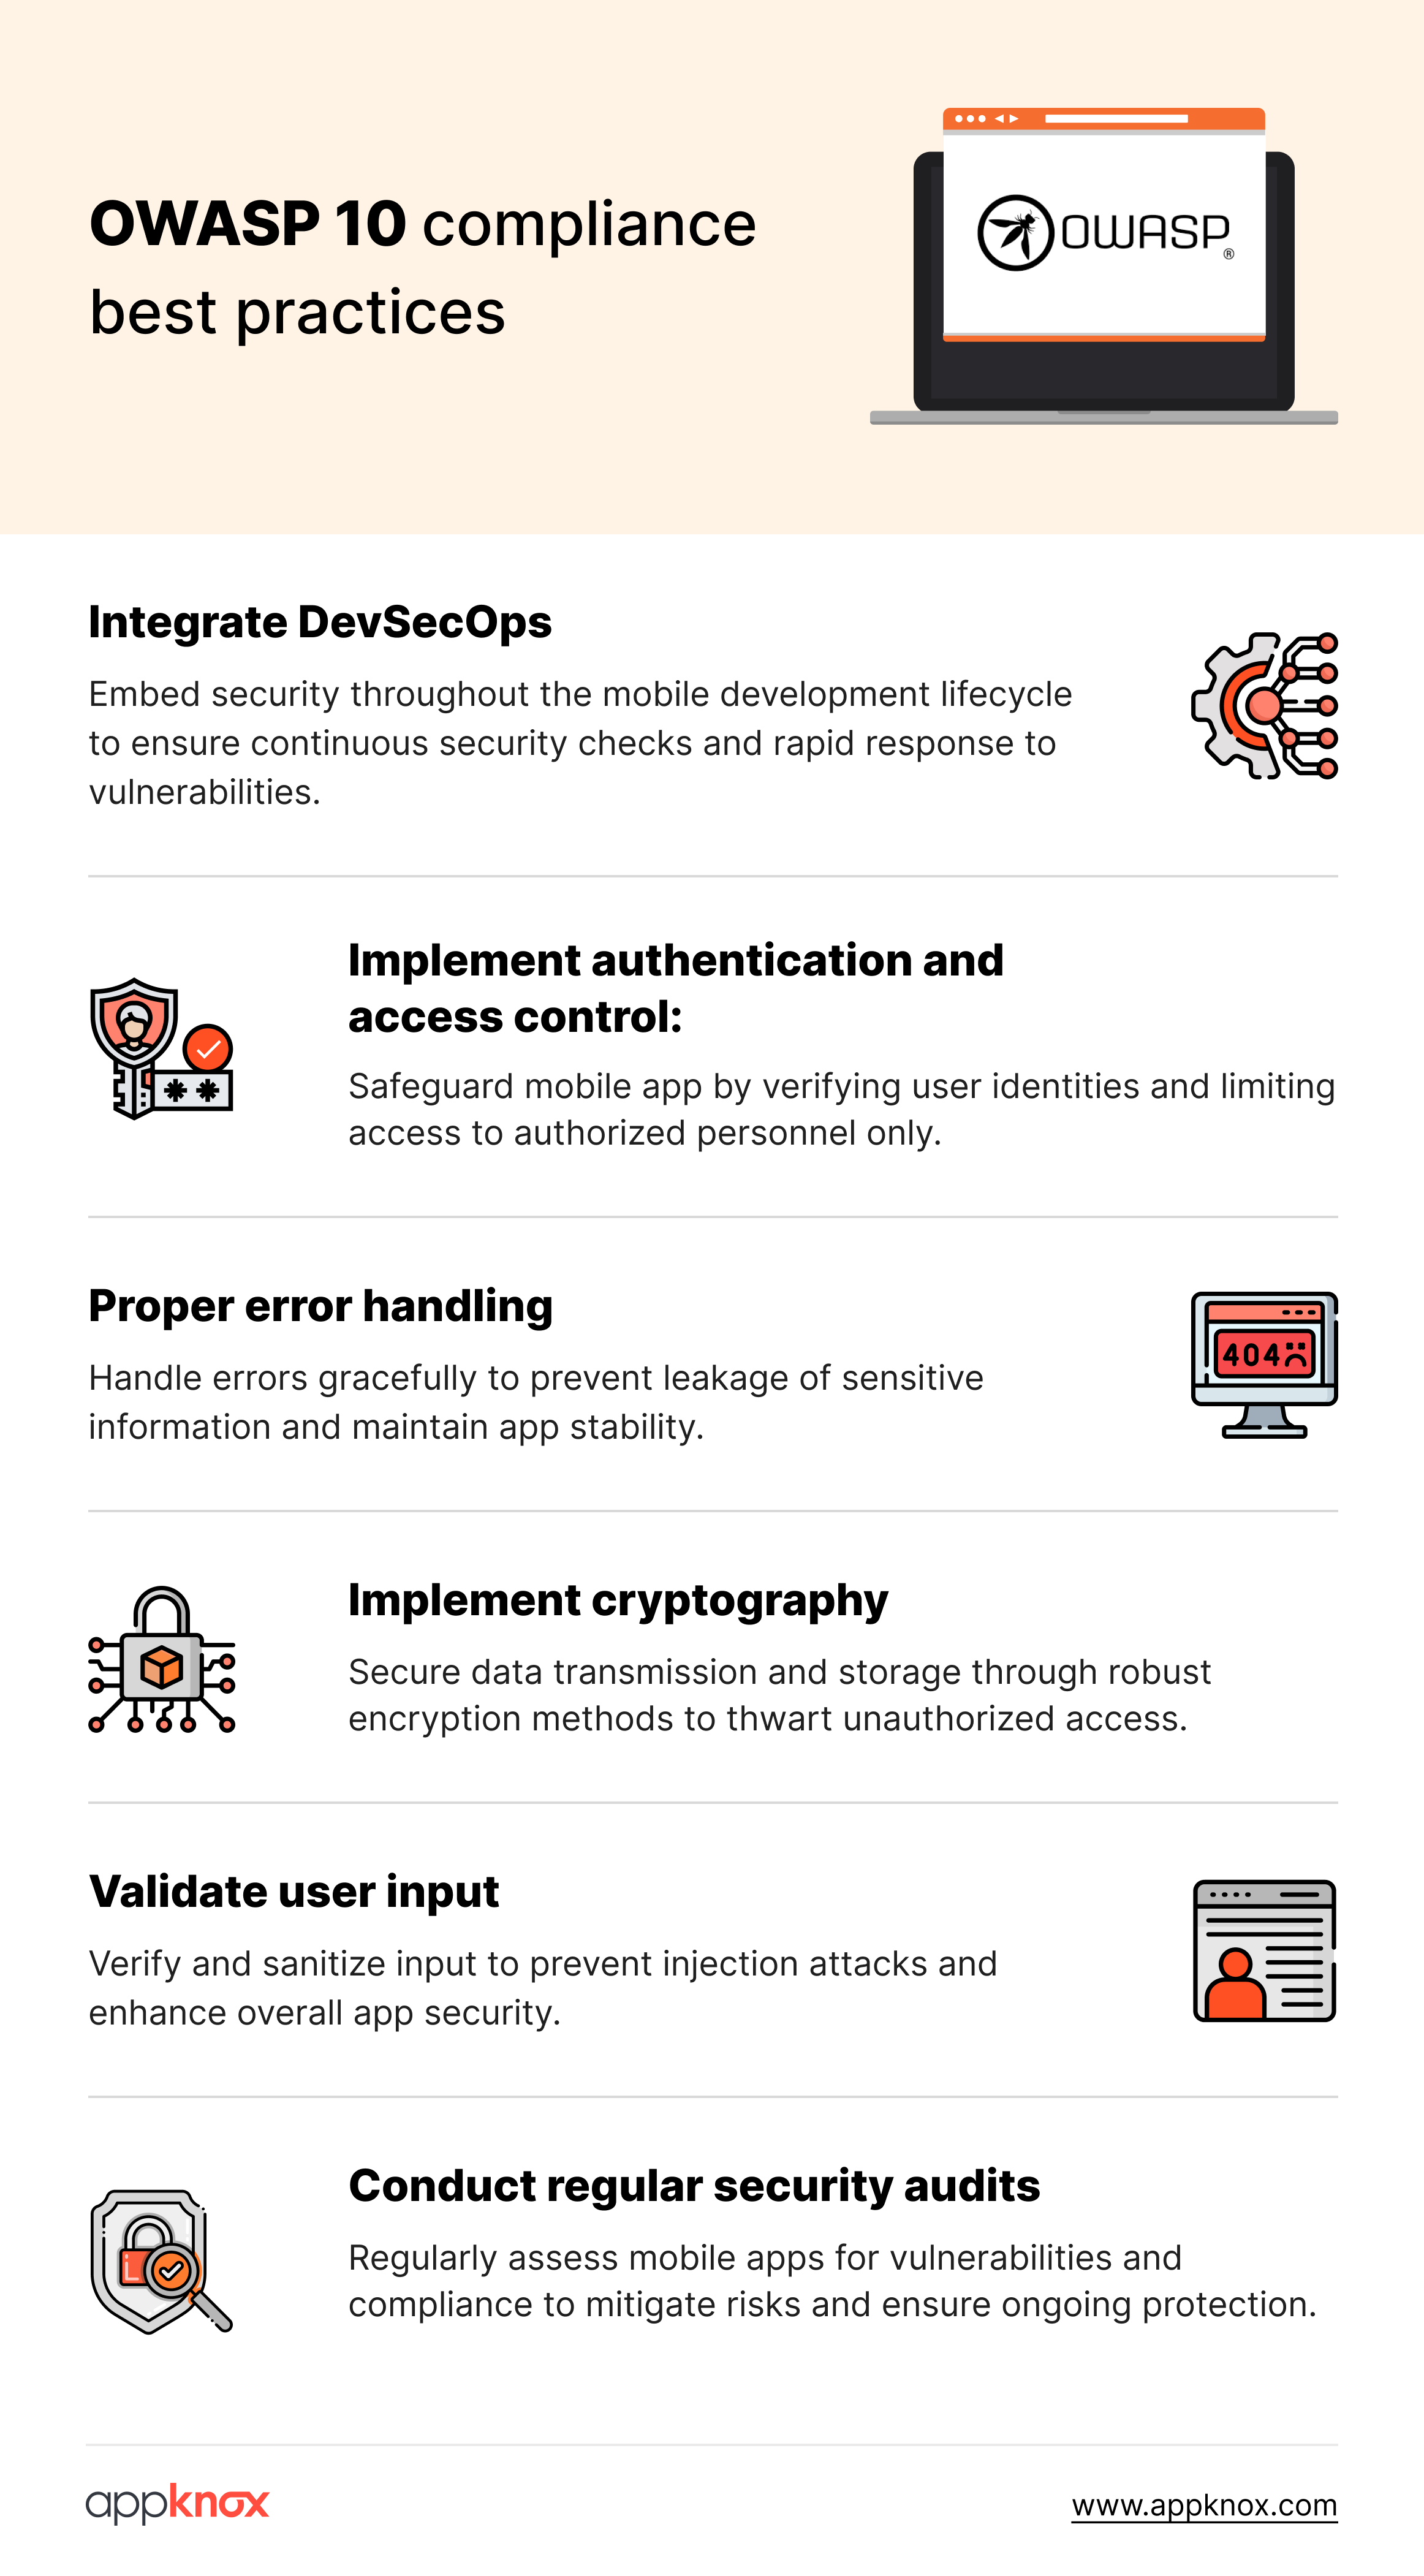 What are the best practices for OWASP top 10 compliance? Mobile application security.